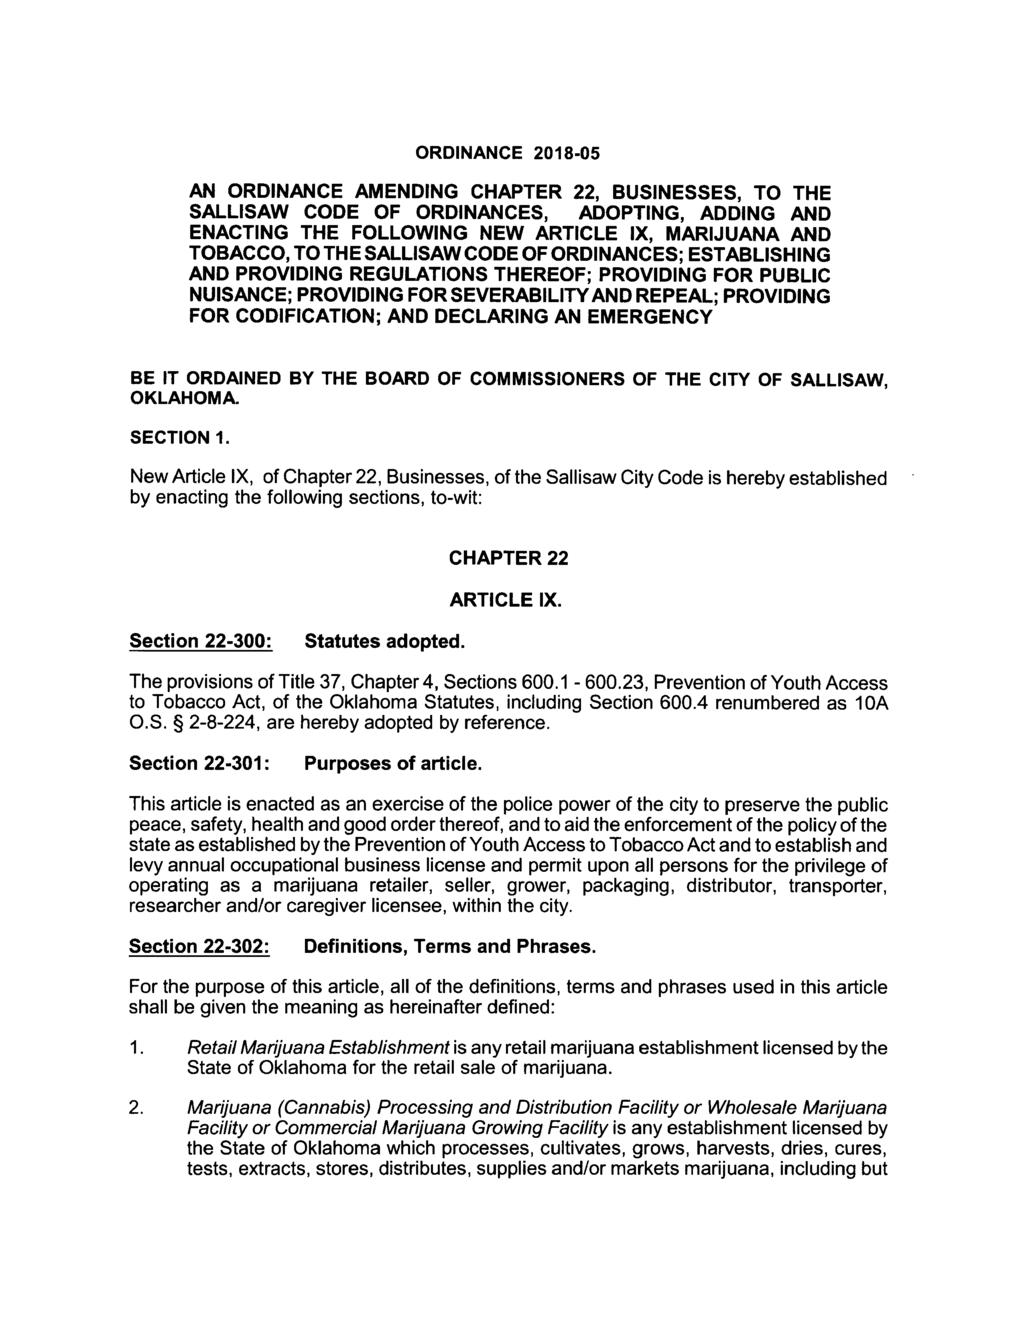 ORDINANCE 2018-05 AN ORDINANCE AMENDING CHAPTER 22, BUSINESSES, TO THE SALLISAW CODE OF ORDINANCES, ADOPTING, ADDING AND ENACTING THE FOLLOWING NEW ARTICLE IX, MARIJUANA AND TOBACCO, TO THE SALLISAW